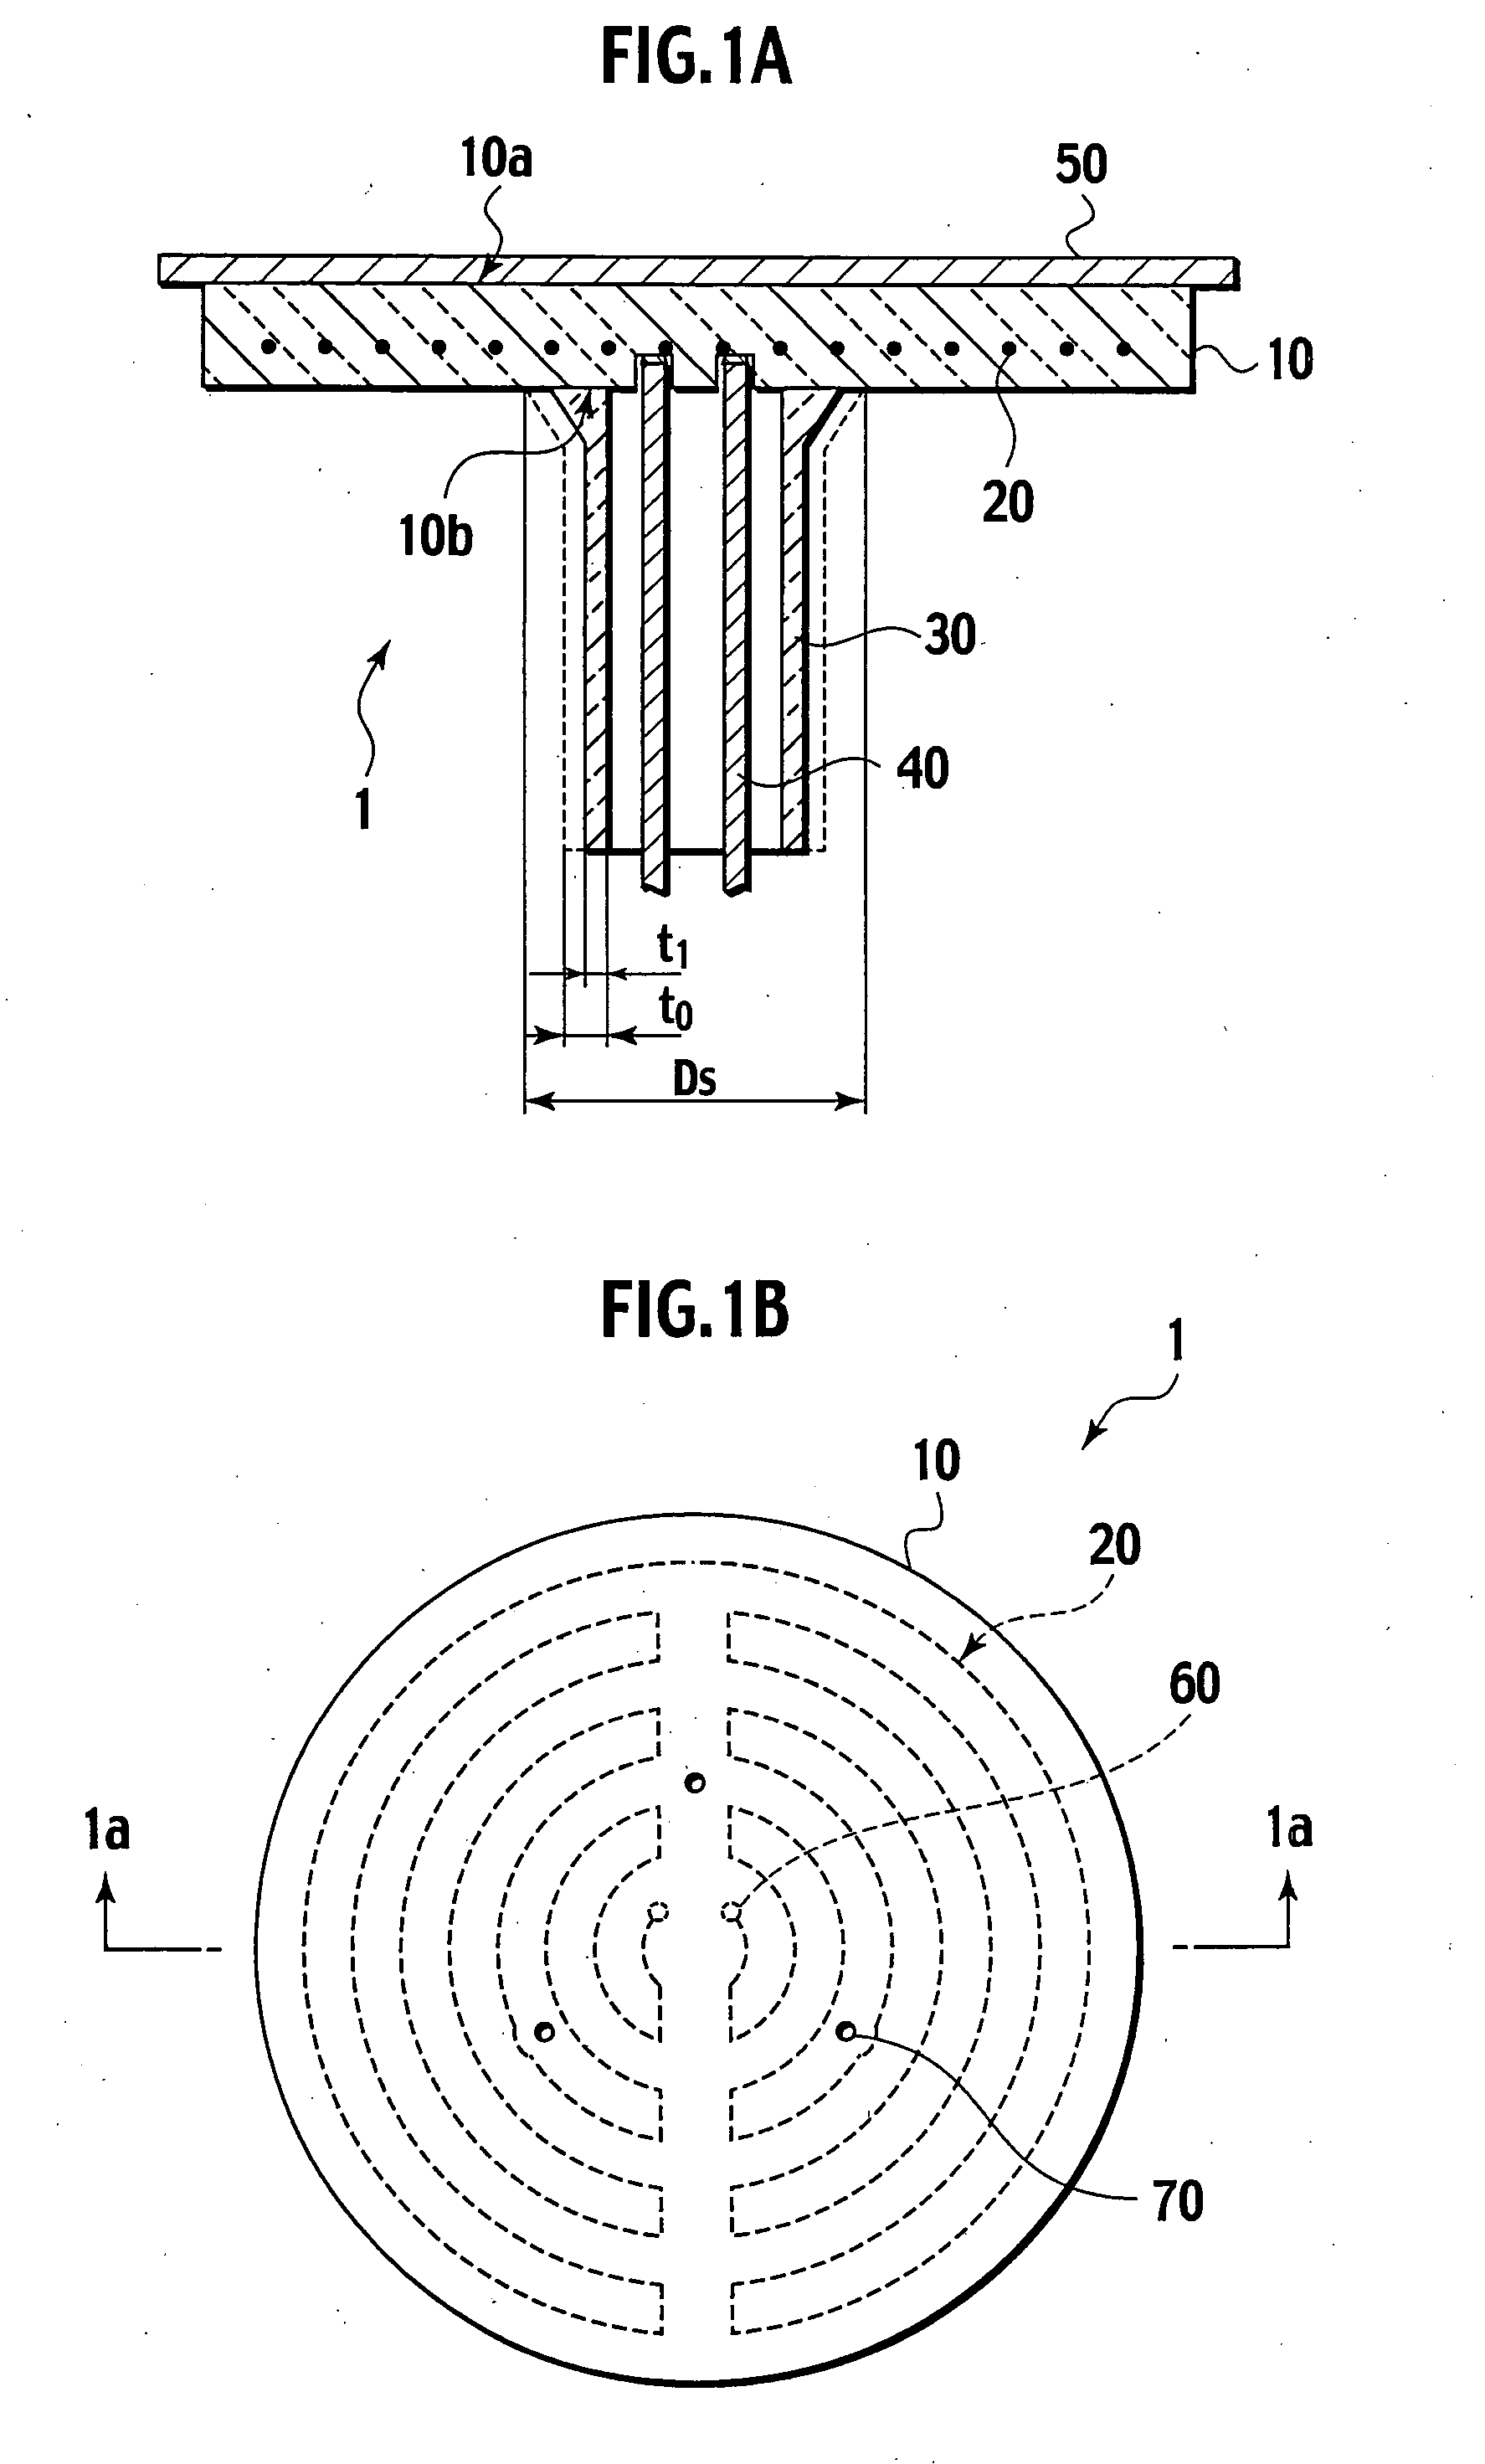 Substrate heating device and manufacturing method for the same